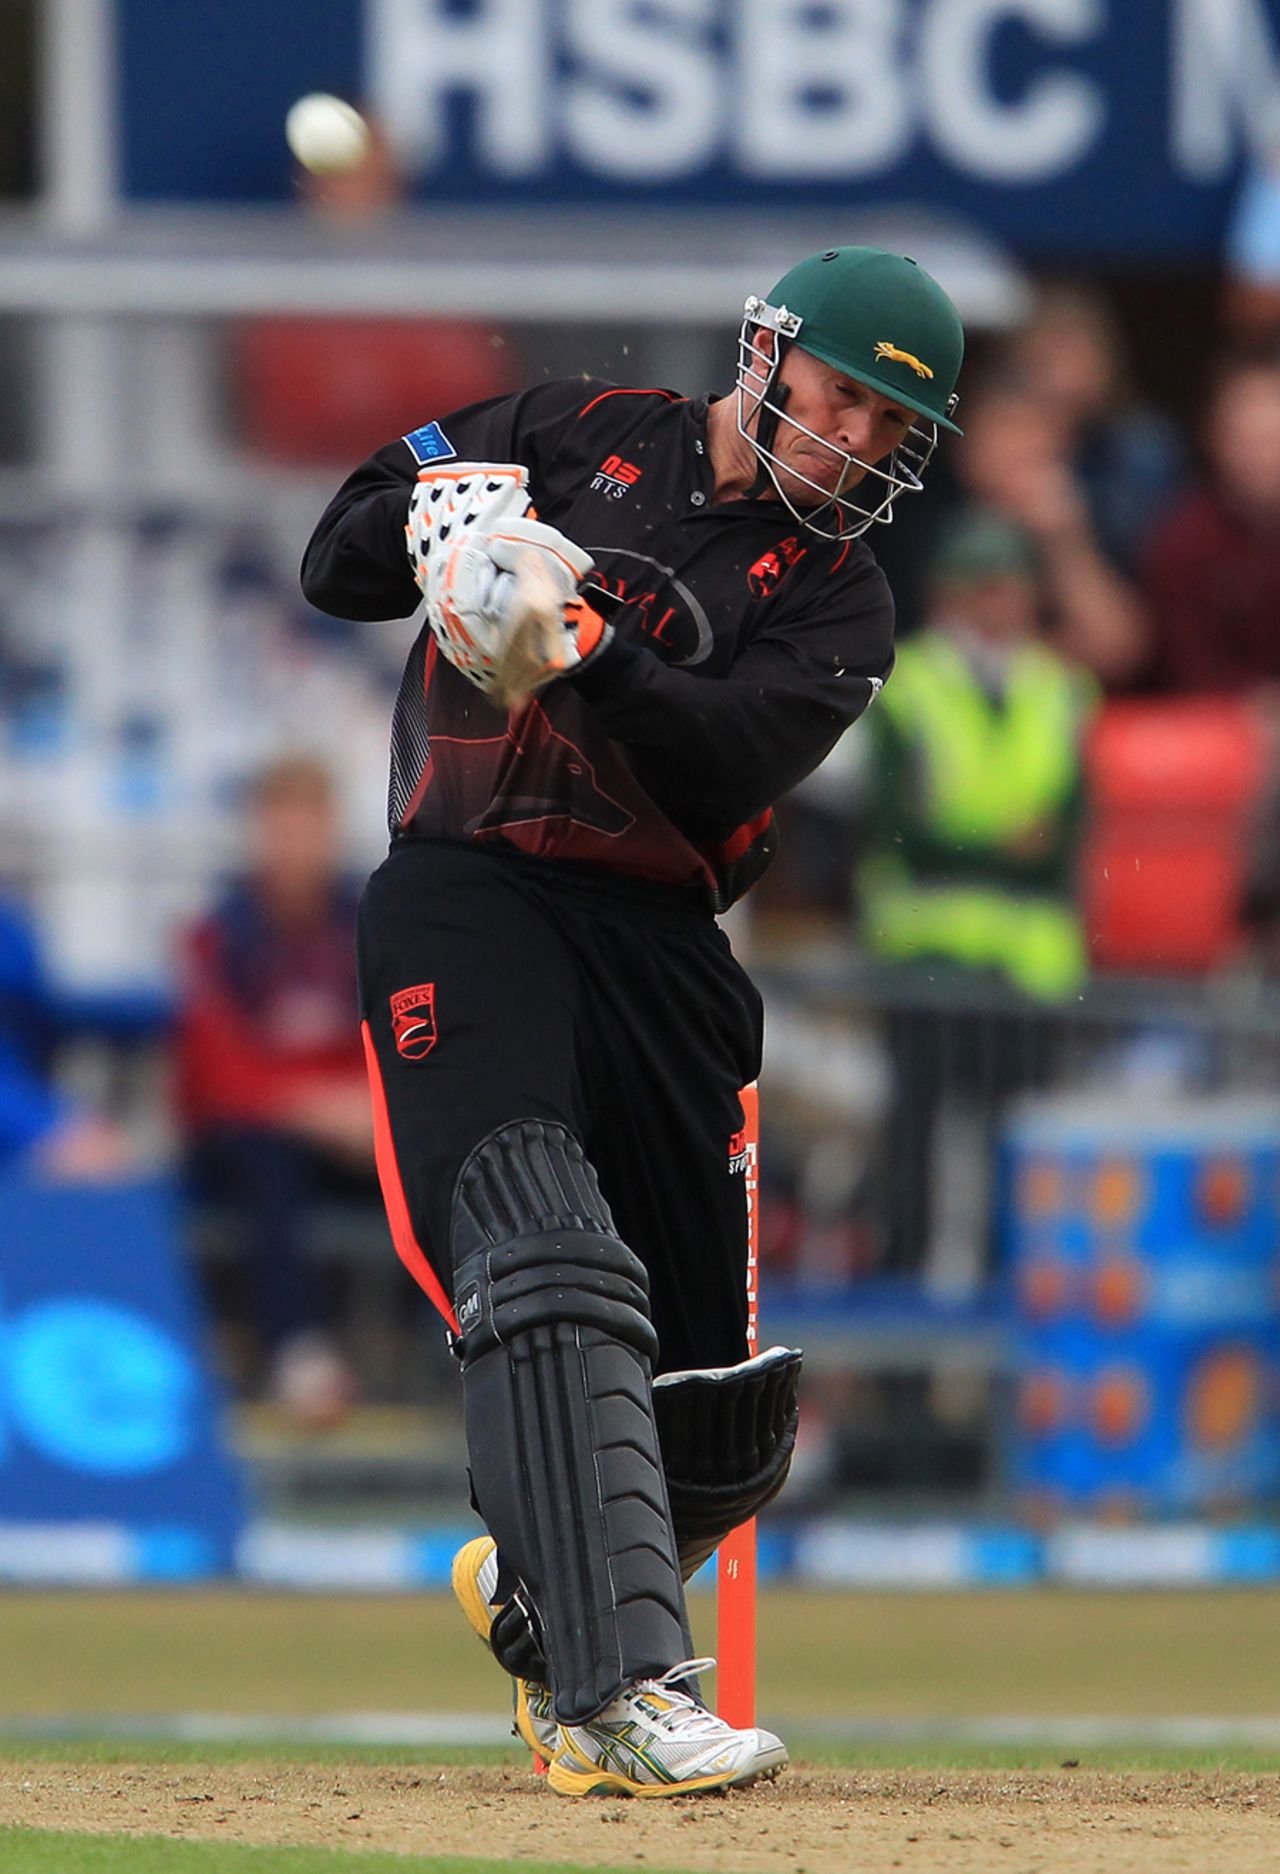 Paul Nixon's 17-ball 31 helped Leicestershire pull off a stunning chase, Leicestershire v Kent, Friends Life t20, 1st Quarter Final, Grace Road 